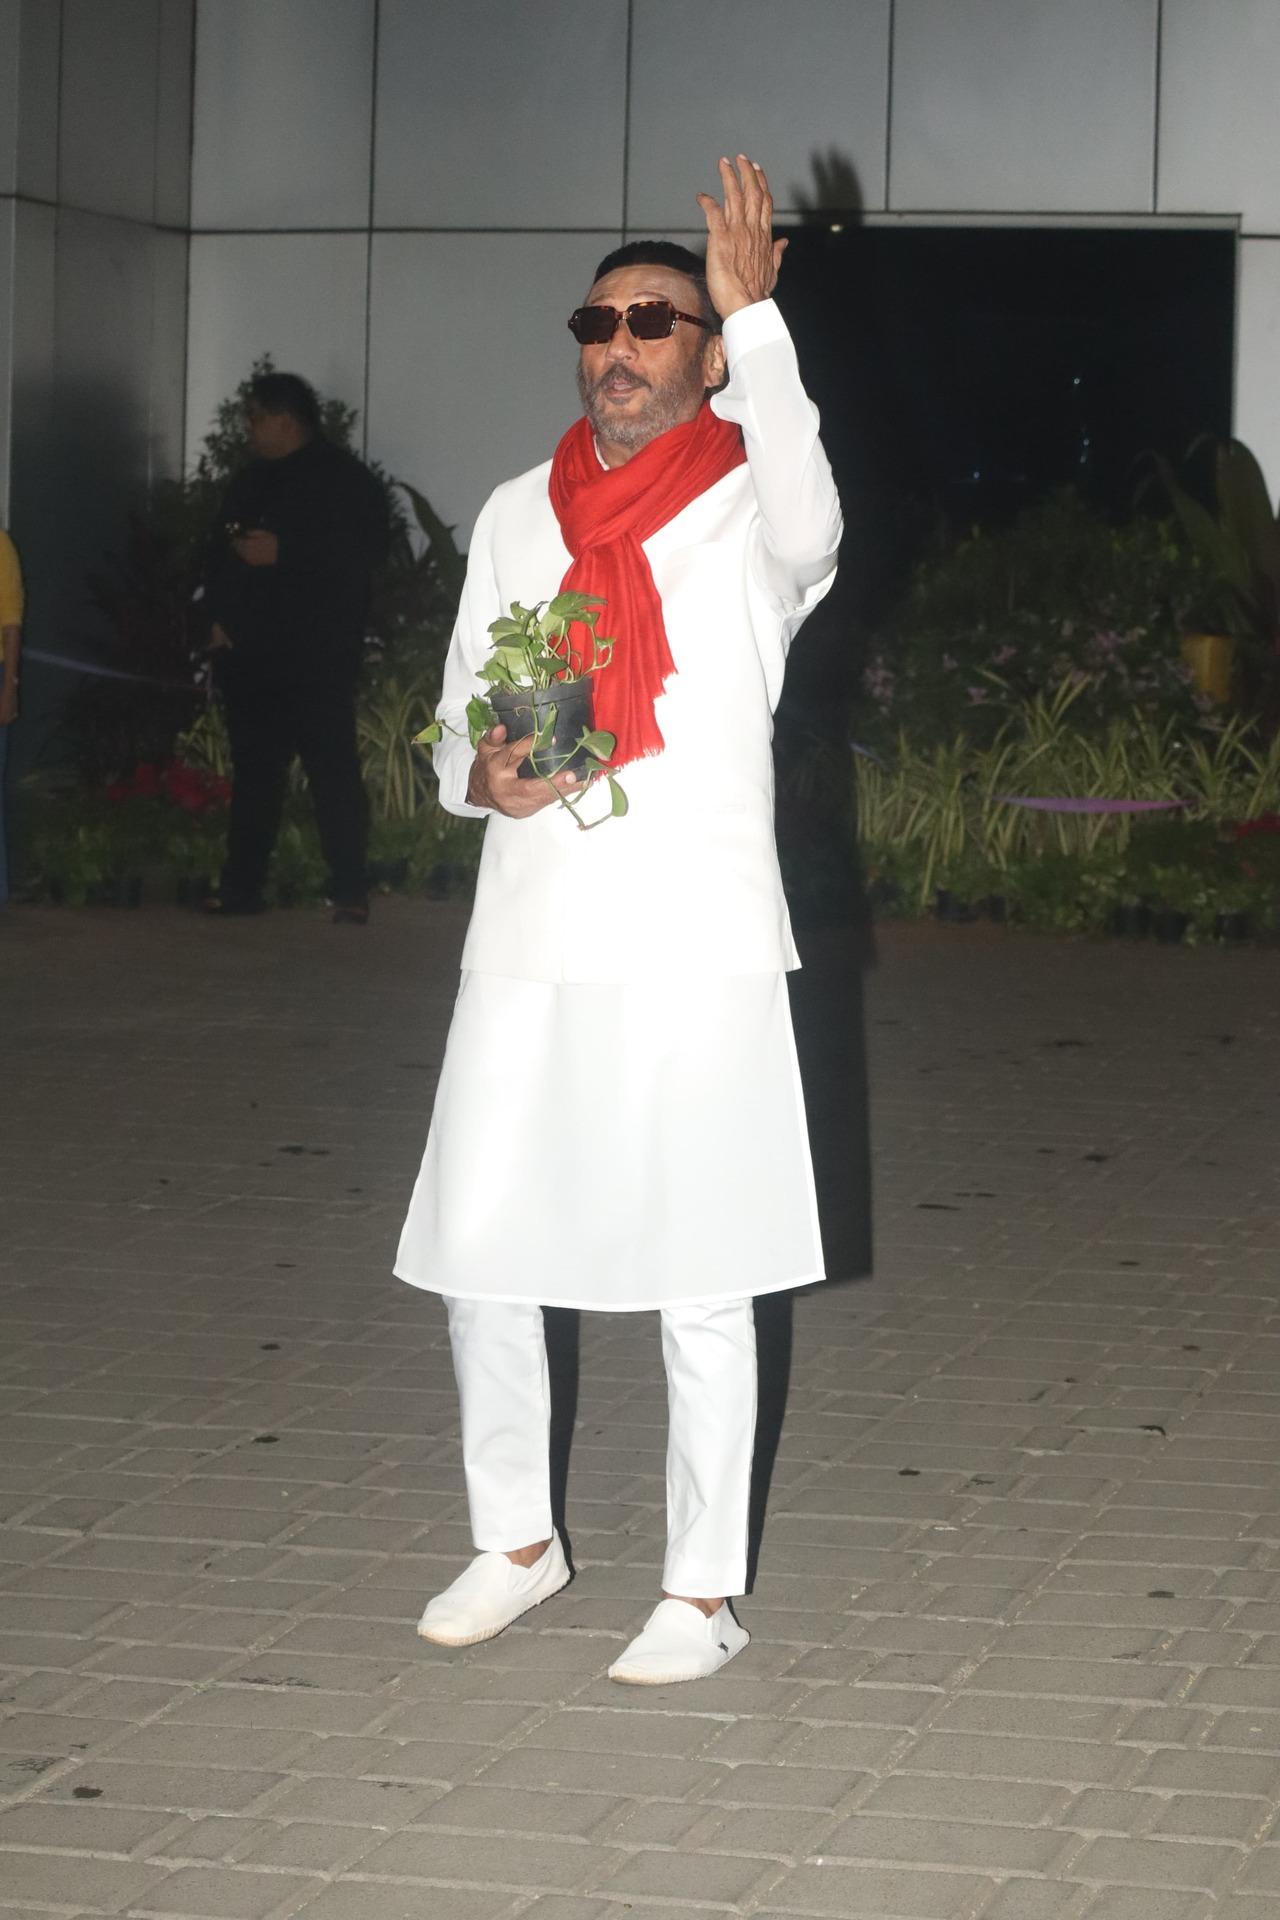 Actor Jackie Shroff was also seen at the airport in a chirpy mood. The actor has carried a sapling as he does for every event he attends. In the last few days, the actor was also seen engaging in community activities like cleaning temple floors